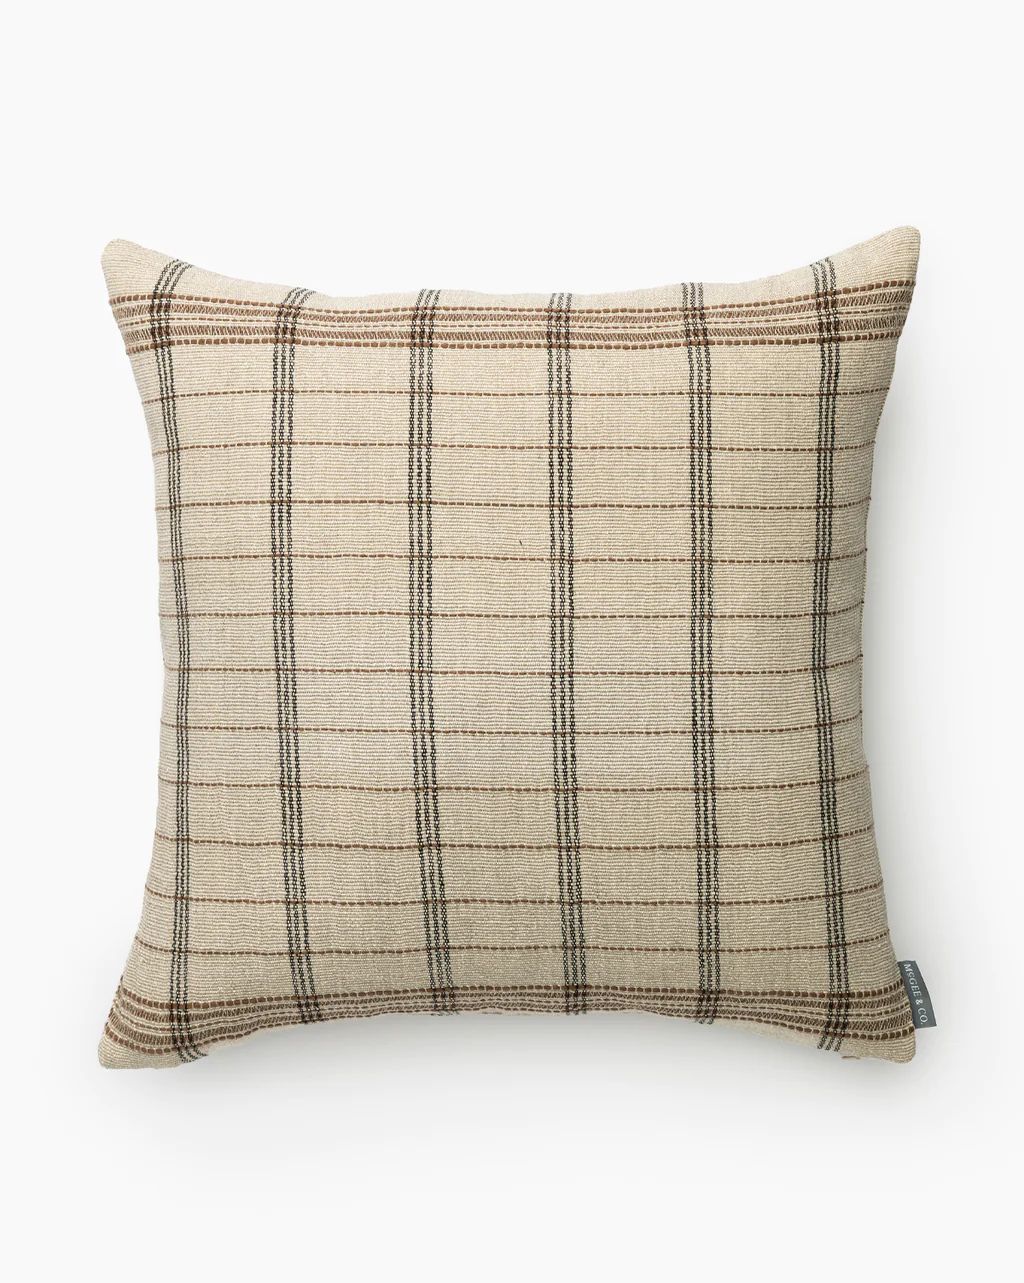 Benedict Pillow Cover | McGee & Co.